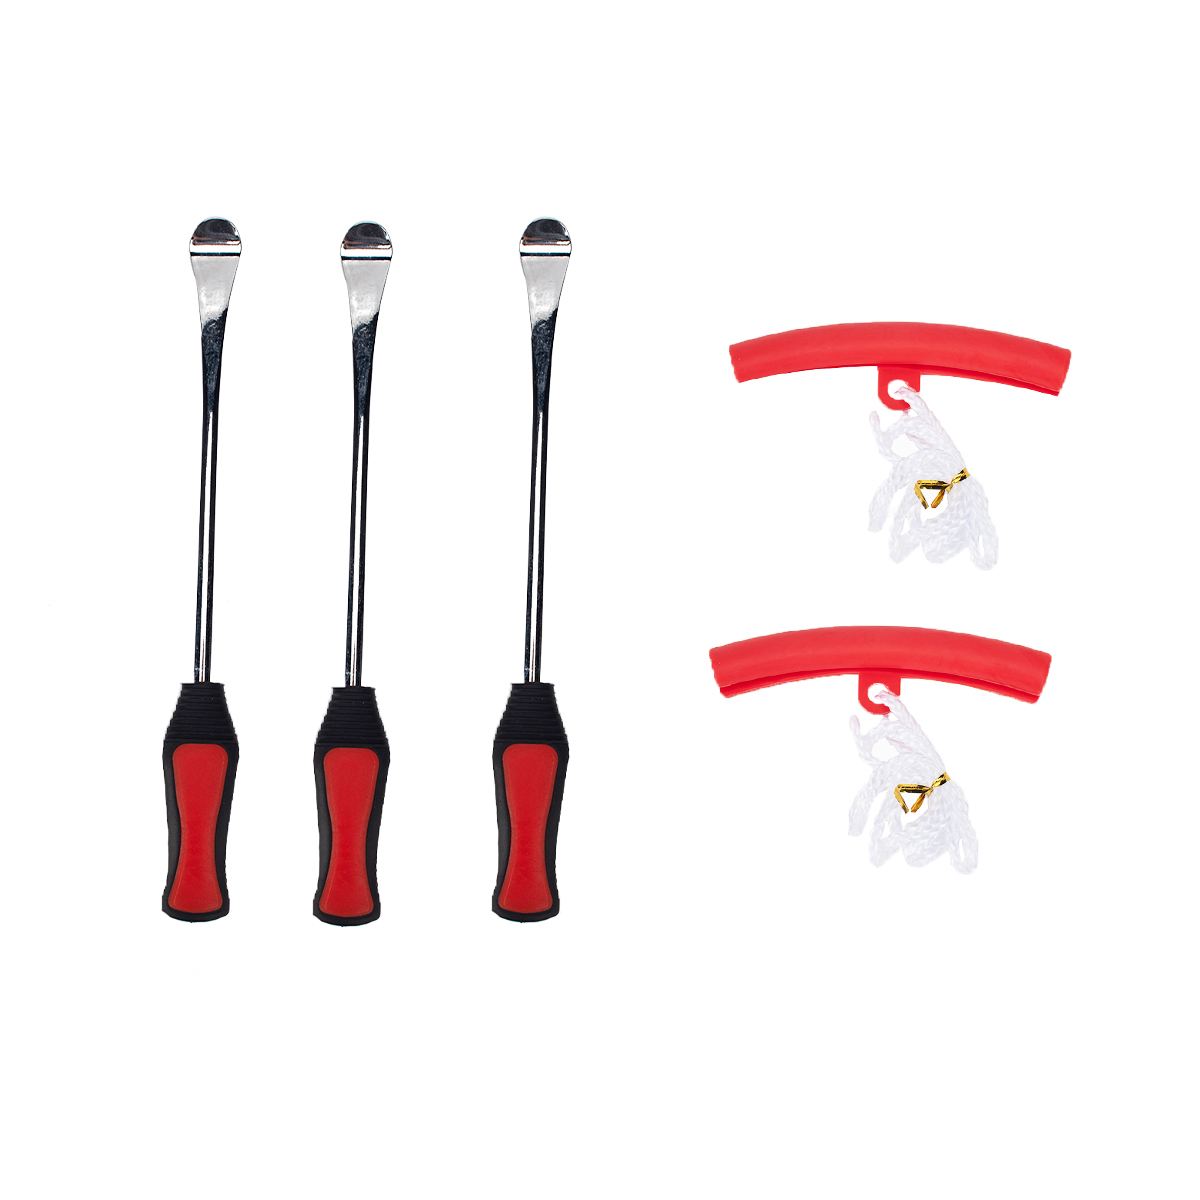 Tire Spoons Lever Motorcycle Dirt Bike Lawn Mower Tire Changing Tools with Bag A2973 (3 crowbars + 2 red tire protectors)